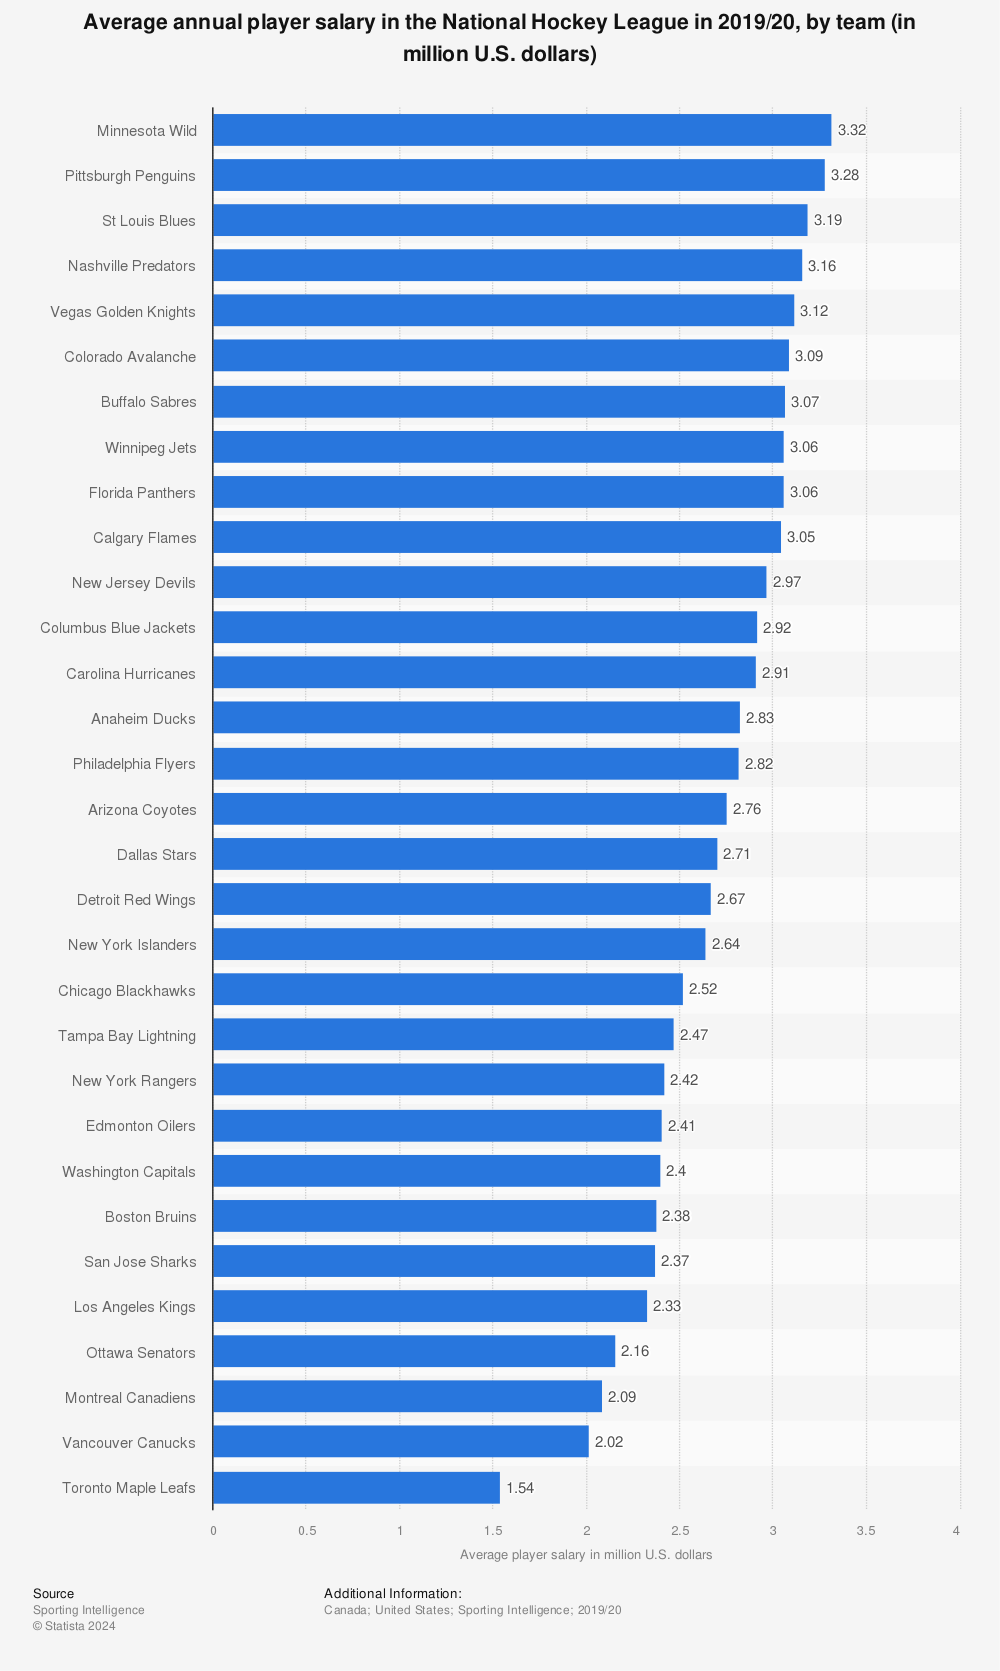 Statistic: Average annual player salary in the National Hockey League in 2019/20, by team (in million U.S. dollars) | Statista